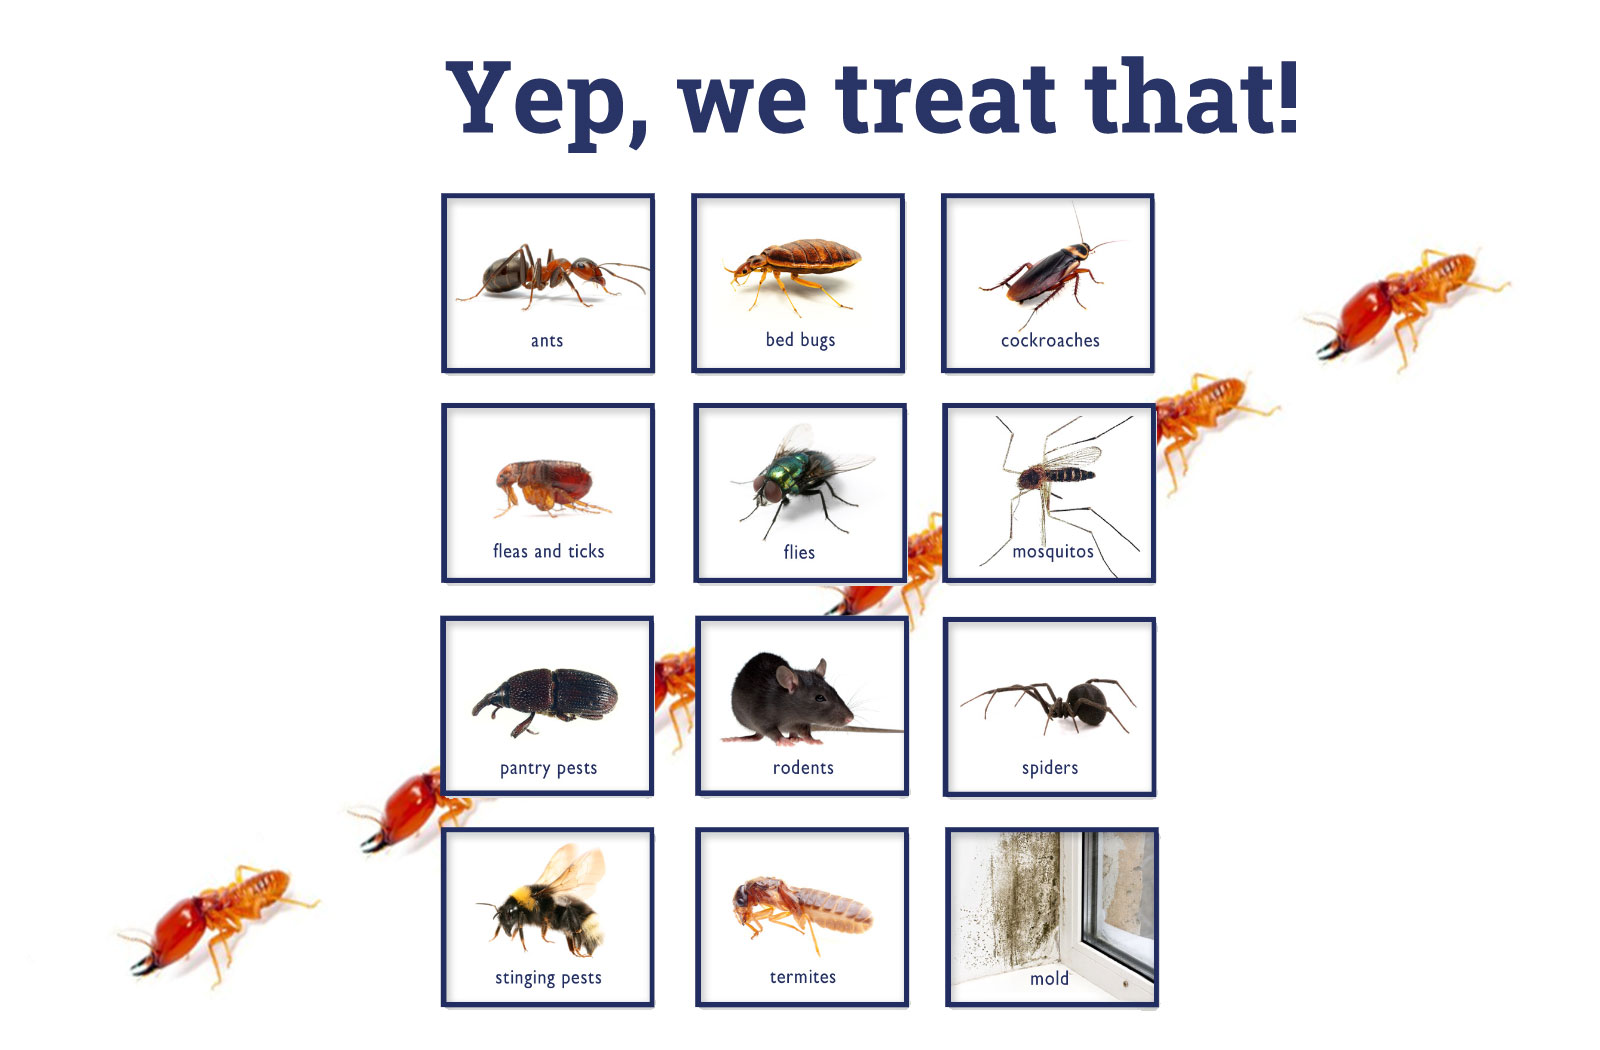 We treat roaches, rats, mice, spiders, fleas, insects, ants, bedbugs, silverfish and more